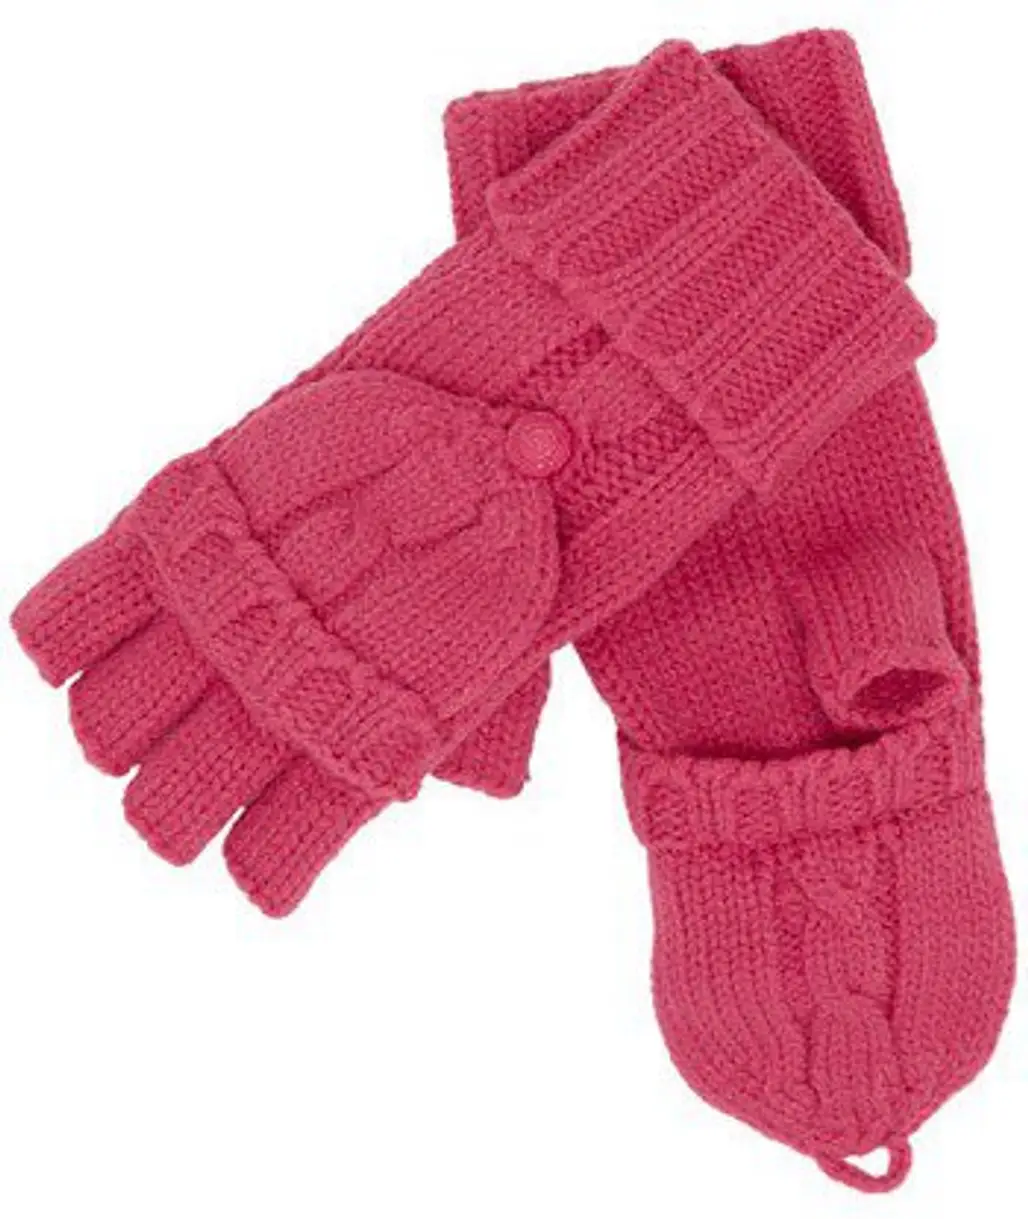 Under the Cable Knit Gloves in Pink